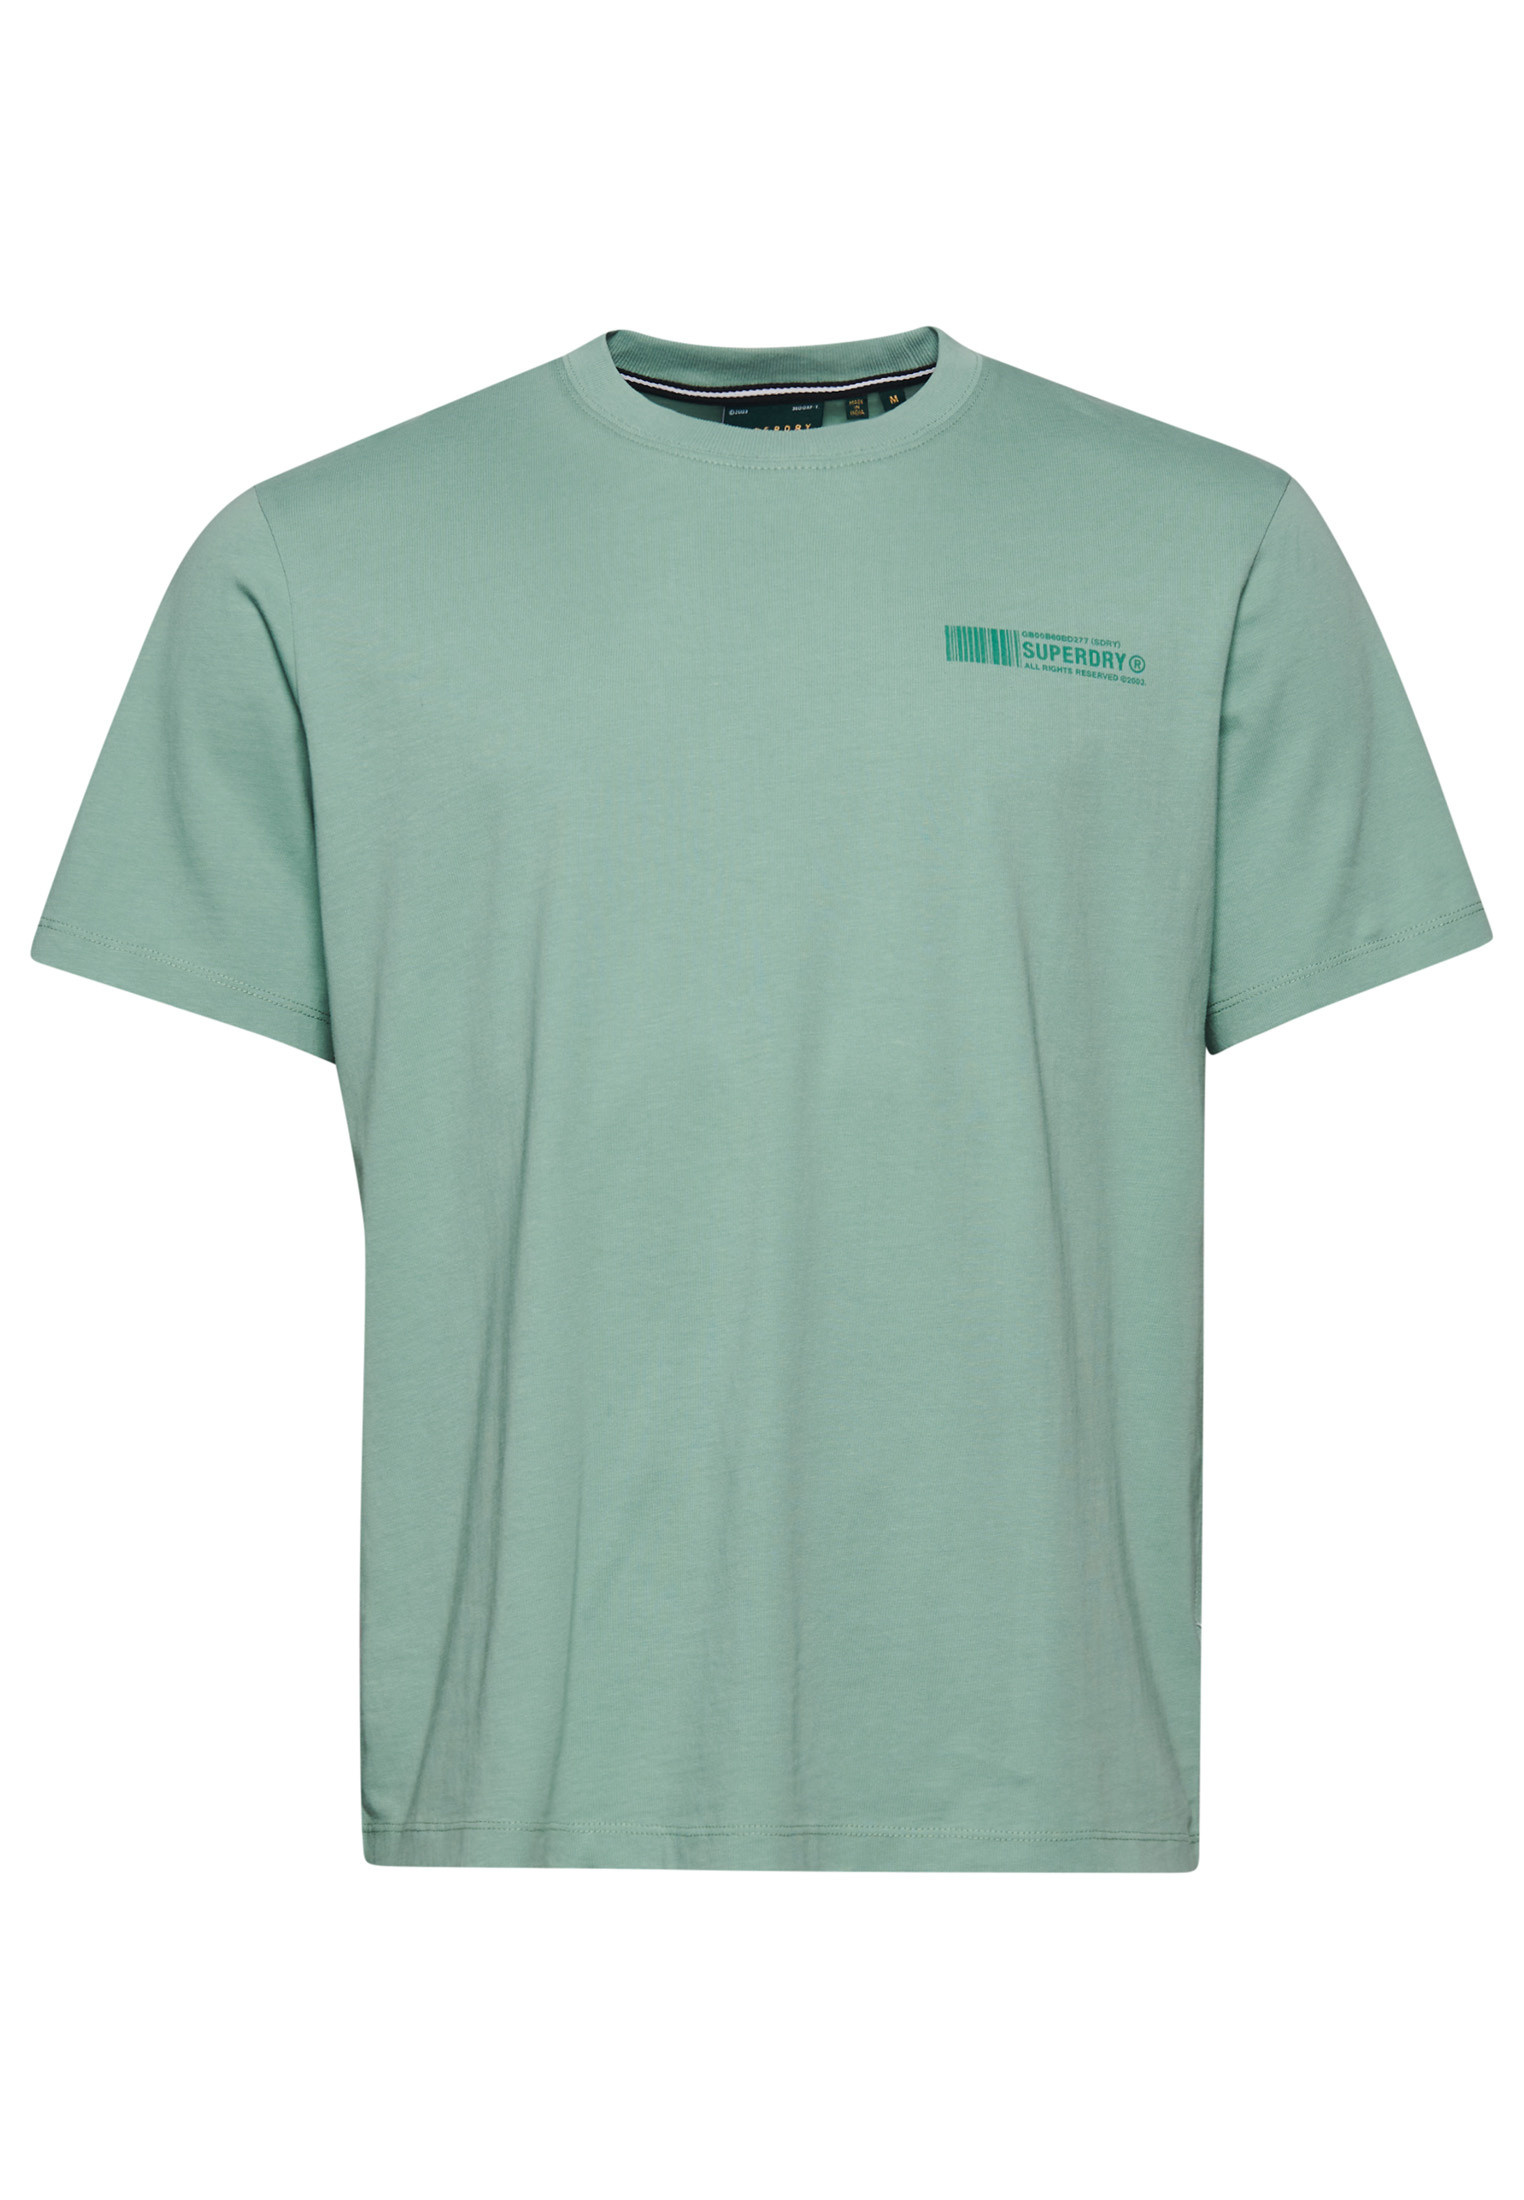 Superdry - T-shirt basica in cotone con mico logo barcode, Verde chiaro, large image number 0